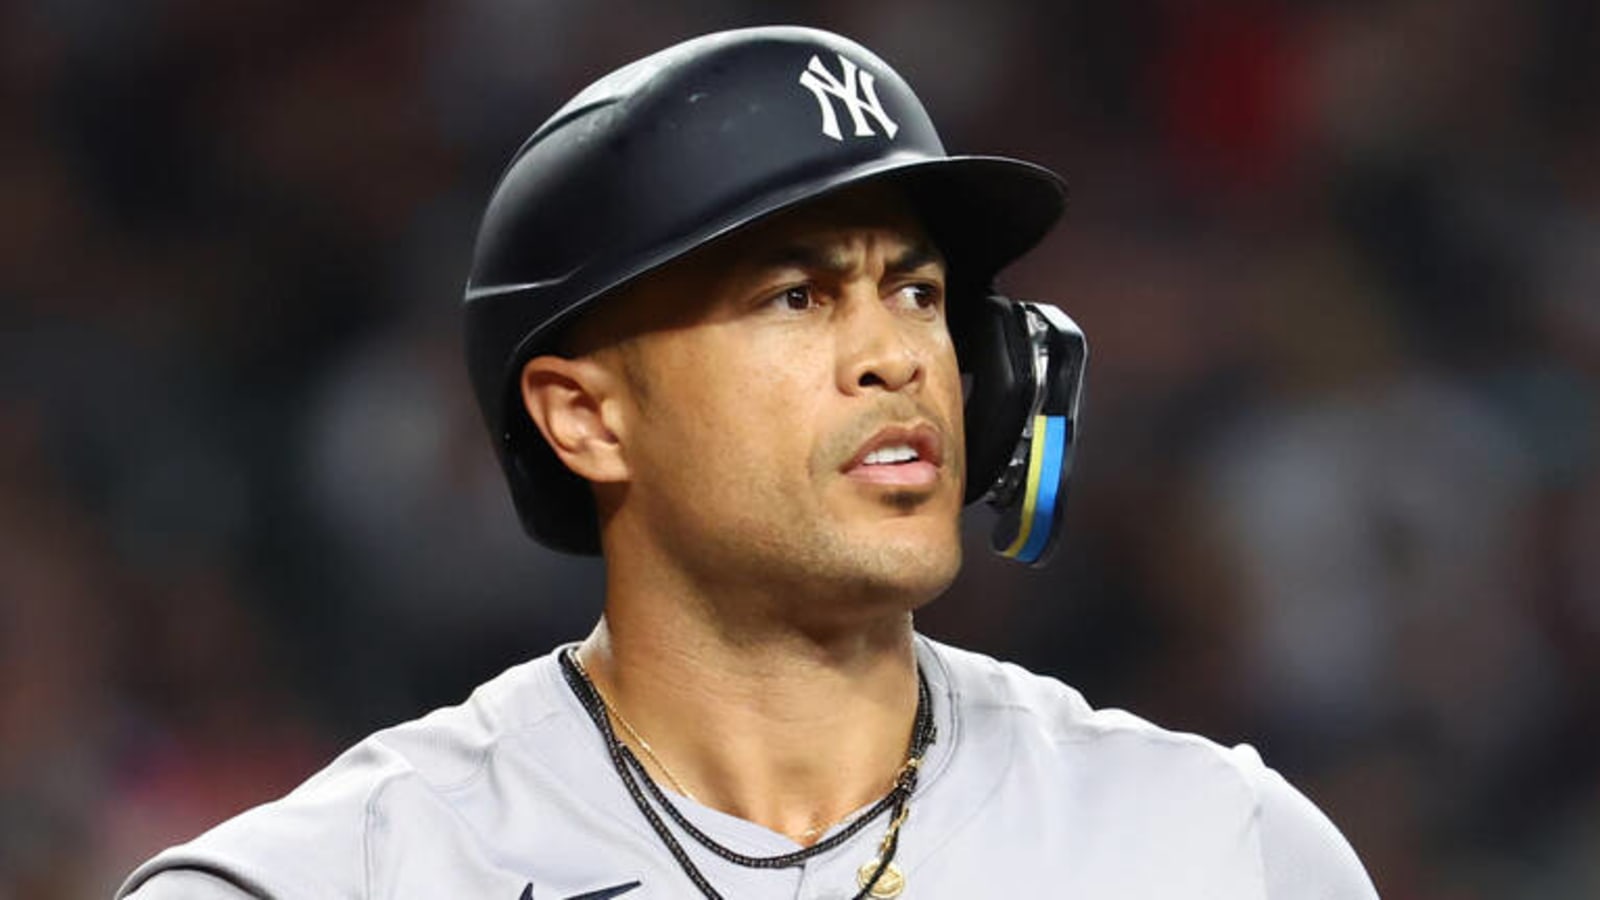 The Yankees are once again getting minimal production from $98 million outfielder